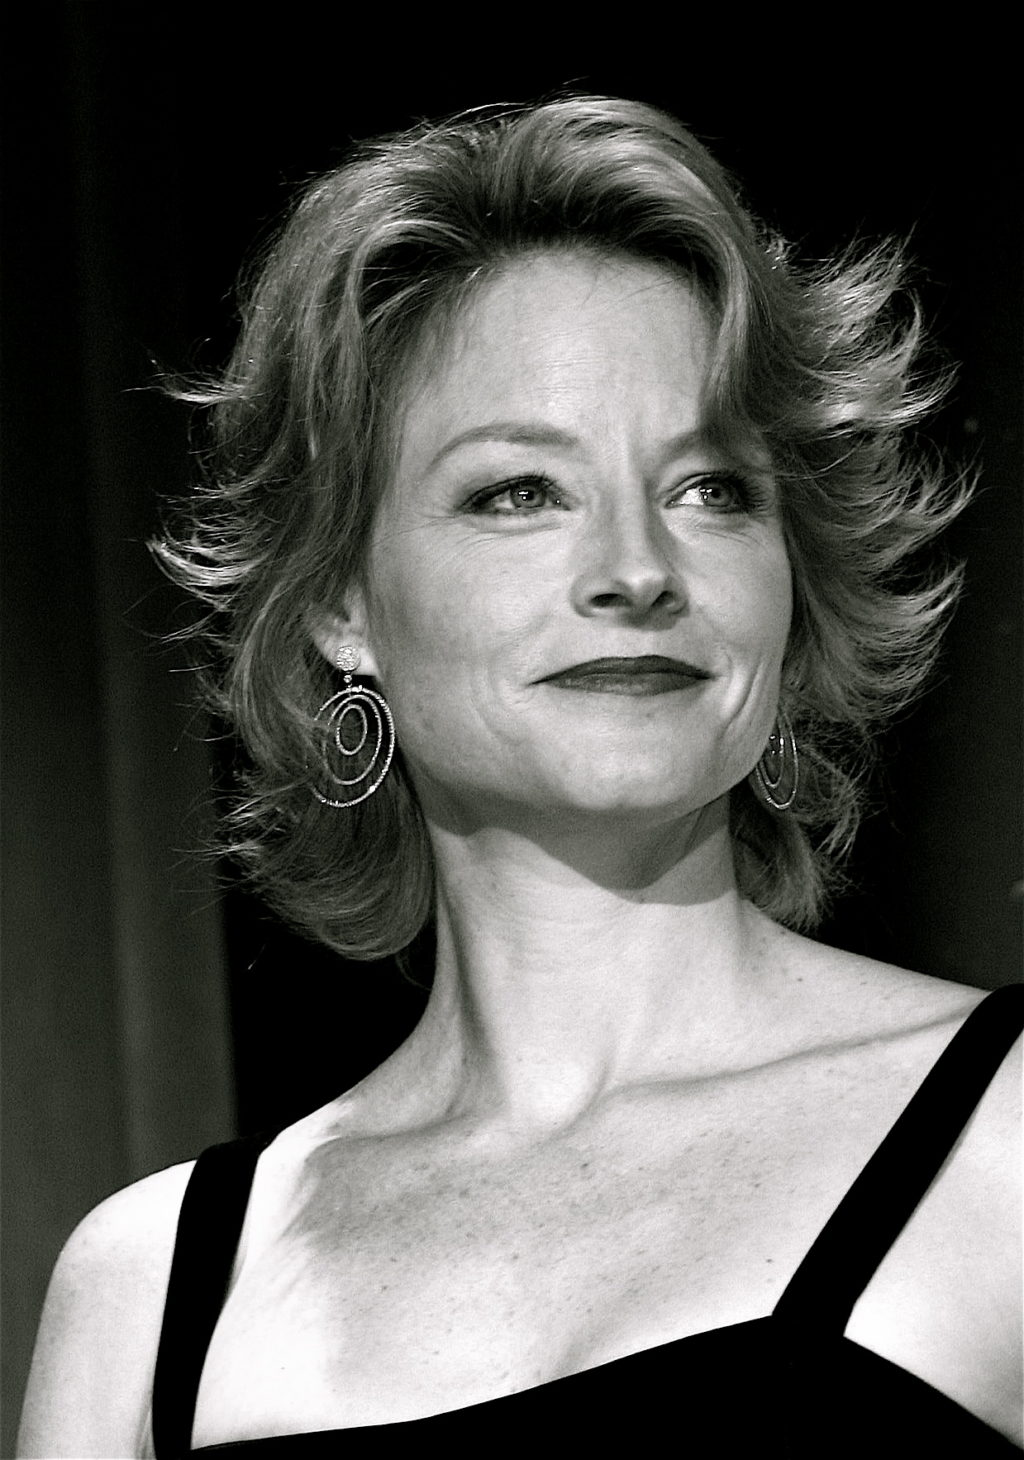 Jodie Foster hottest celebrity the year you were born